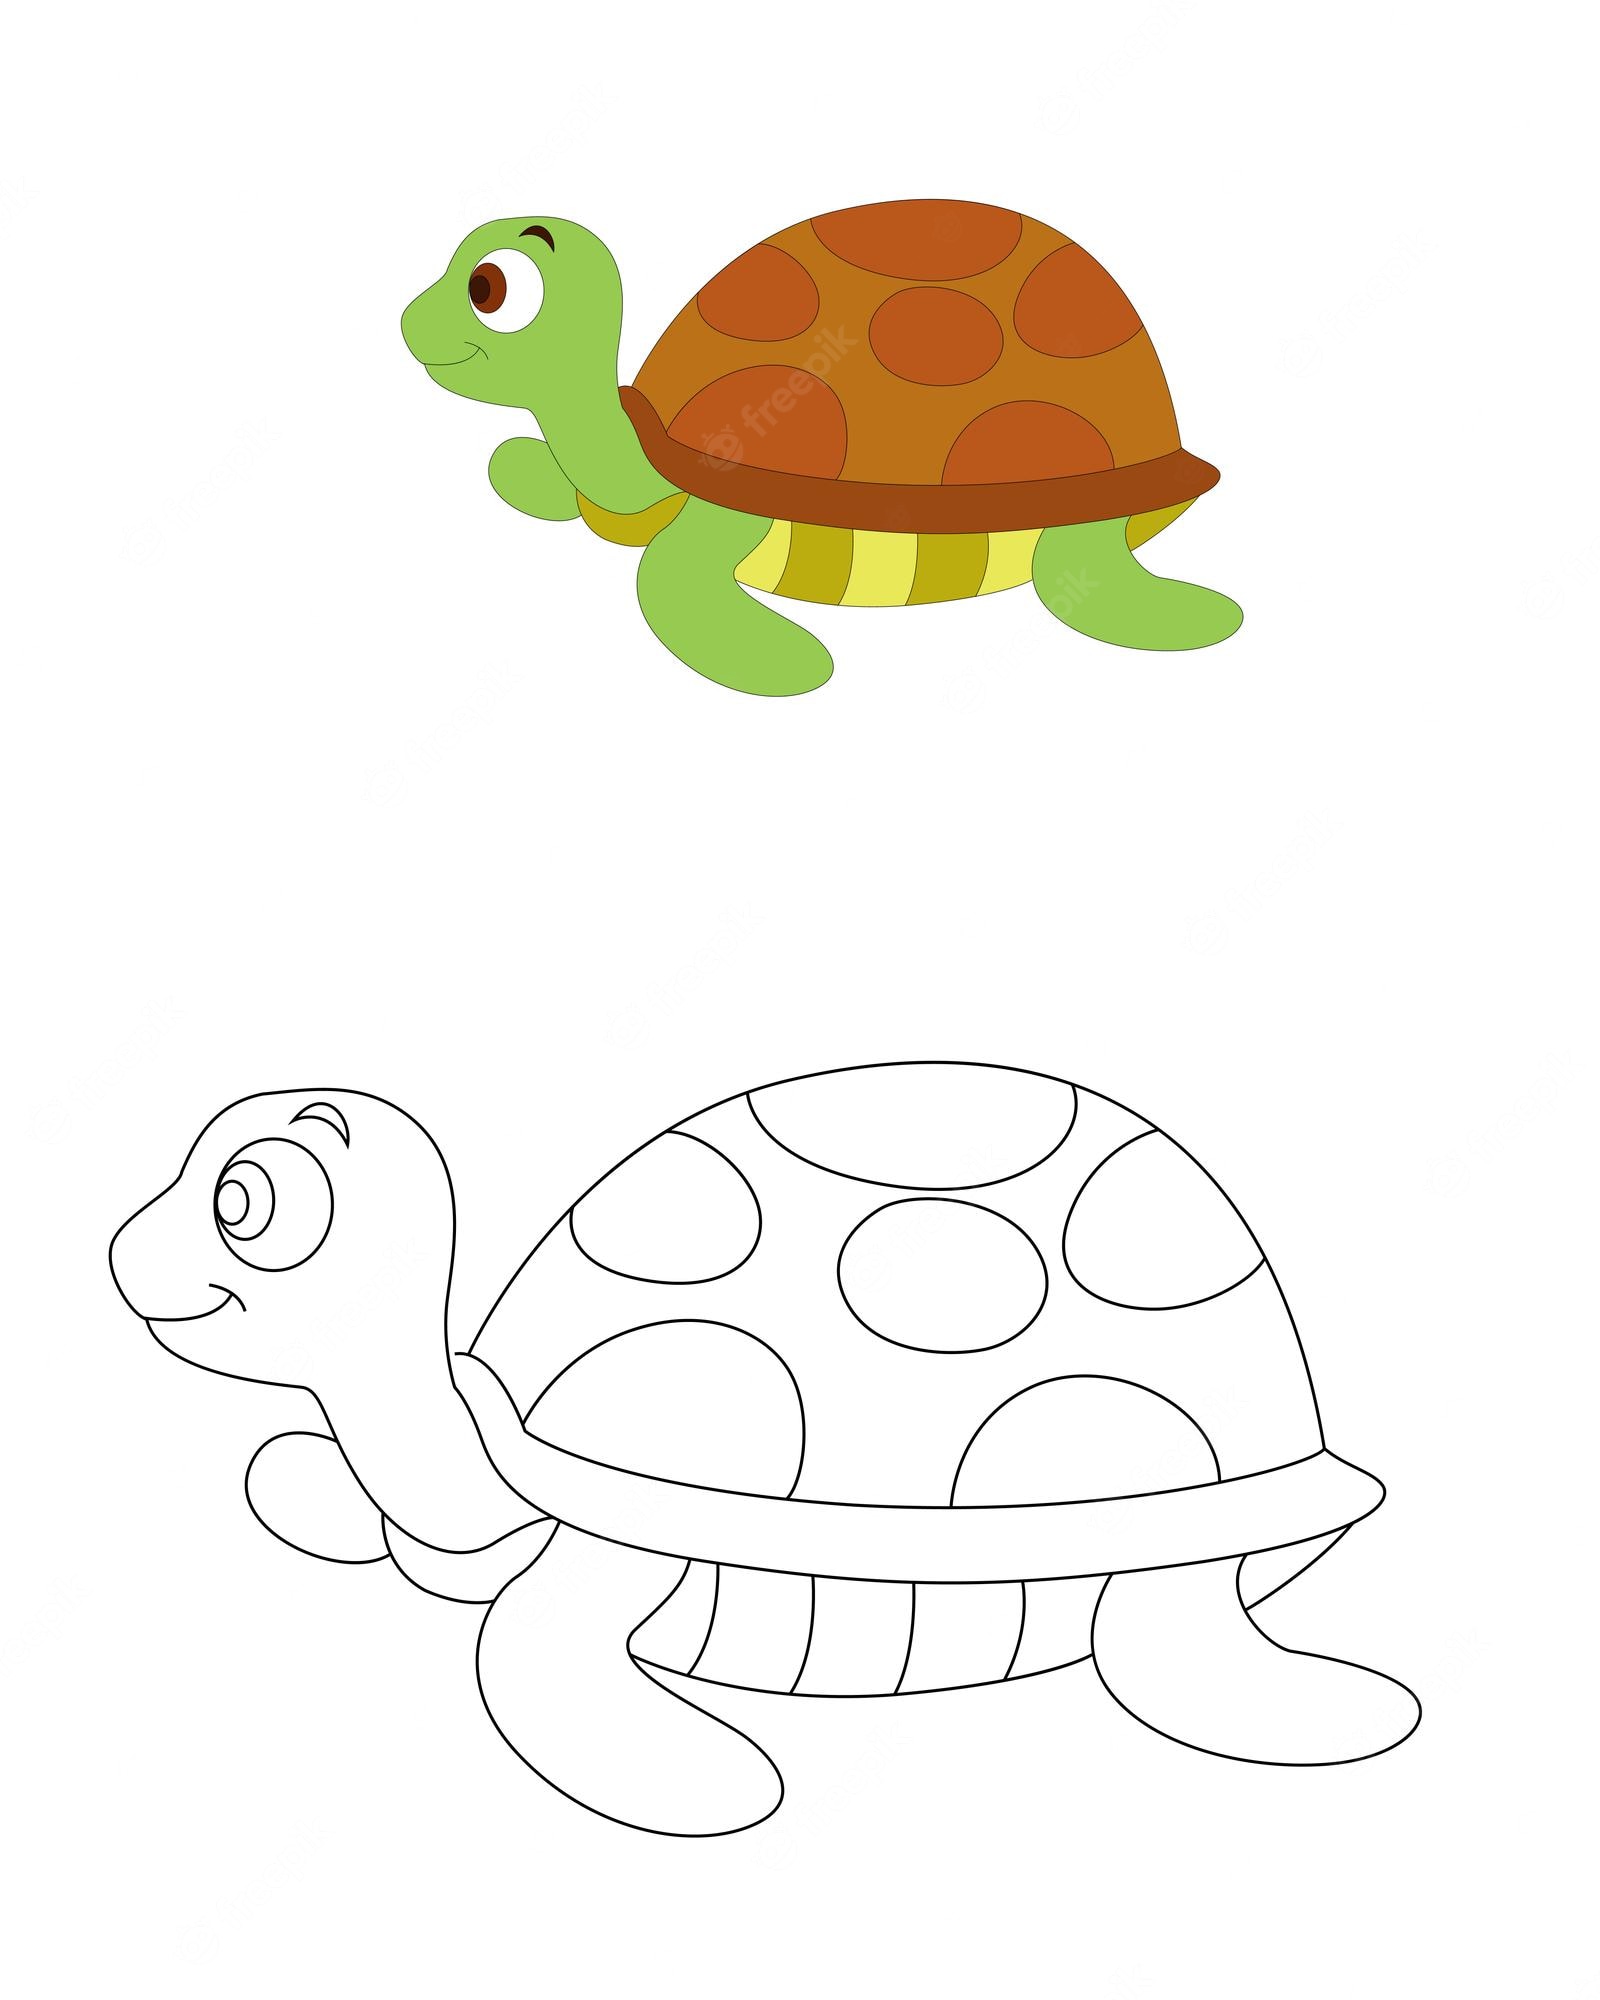 Tortoise Drawing and Coloring for Kids and Toddlers ✓ How to Draw a Tortoise  Easy Step by Step - YouTube